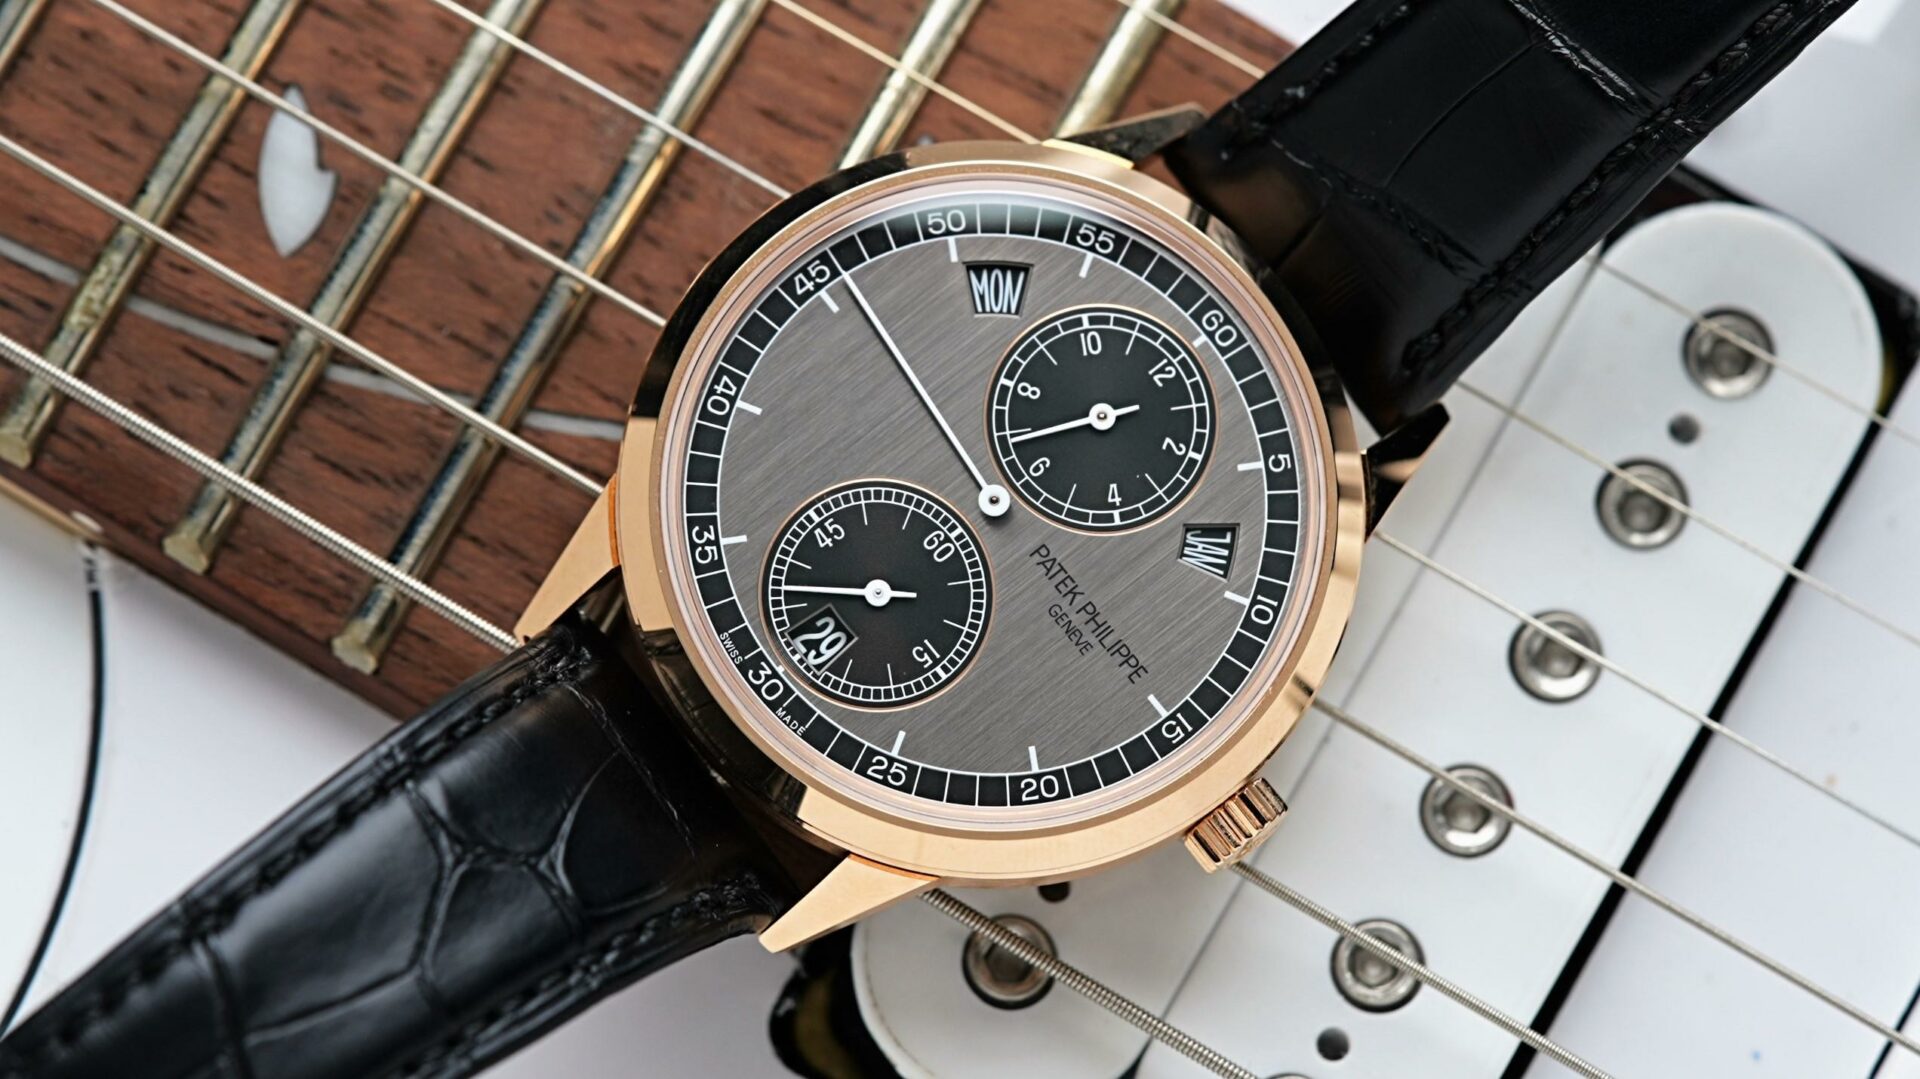 Patek Philippe Annual Calendar displayed under white lighting with guitar in background.